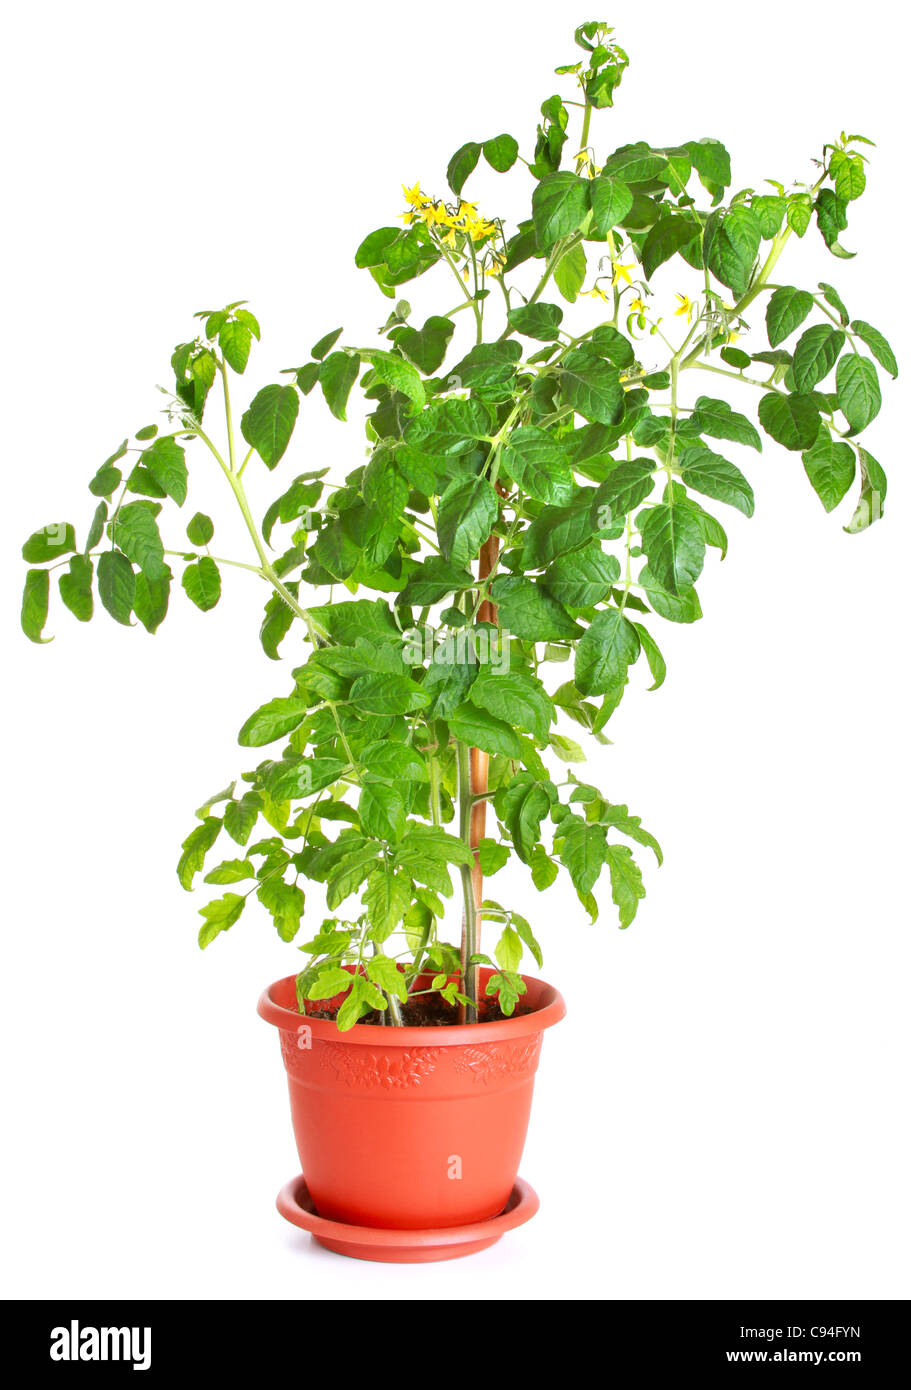 Tomato bush growing in a flower pot isolated on white Stock Photo